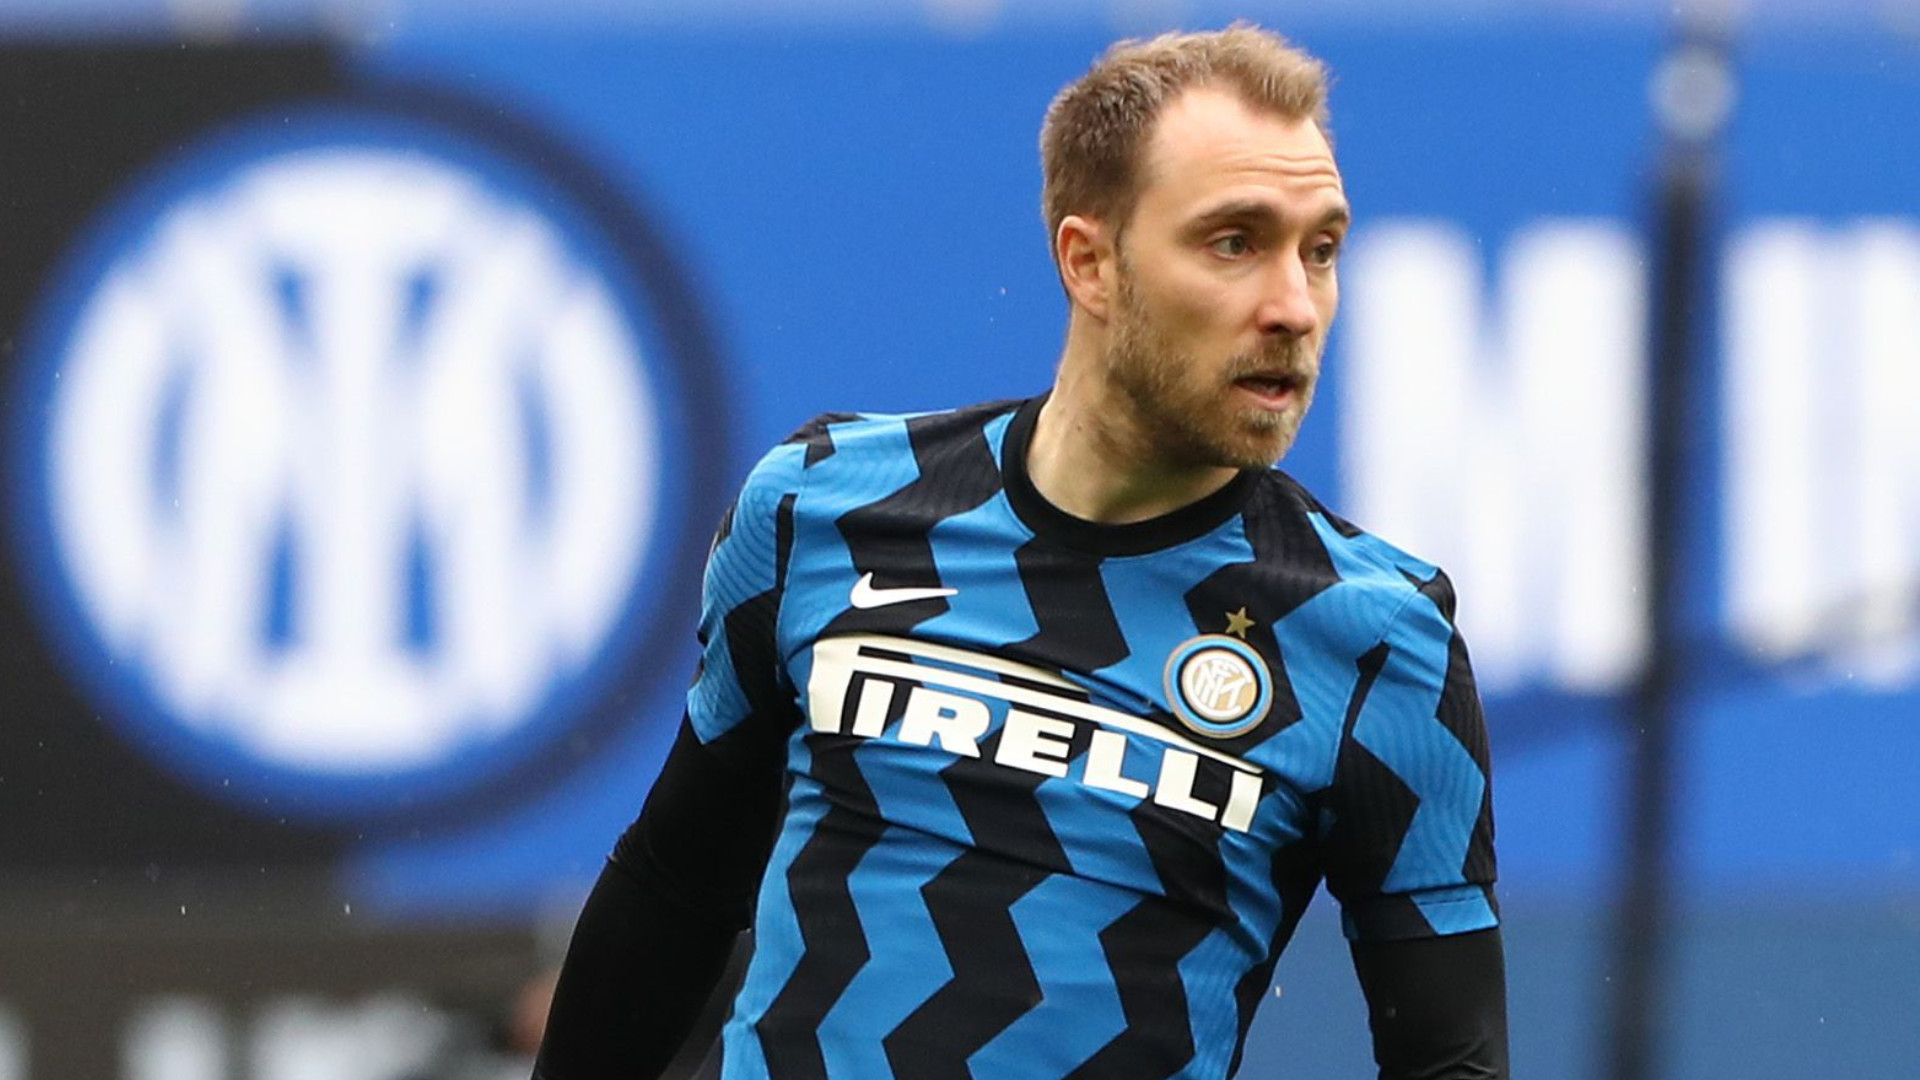 Inter to sell Eriksen as Denmark star's defibrillator keeps him out of action in Serie A